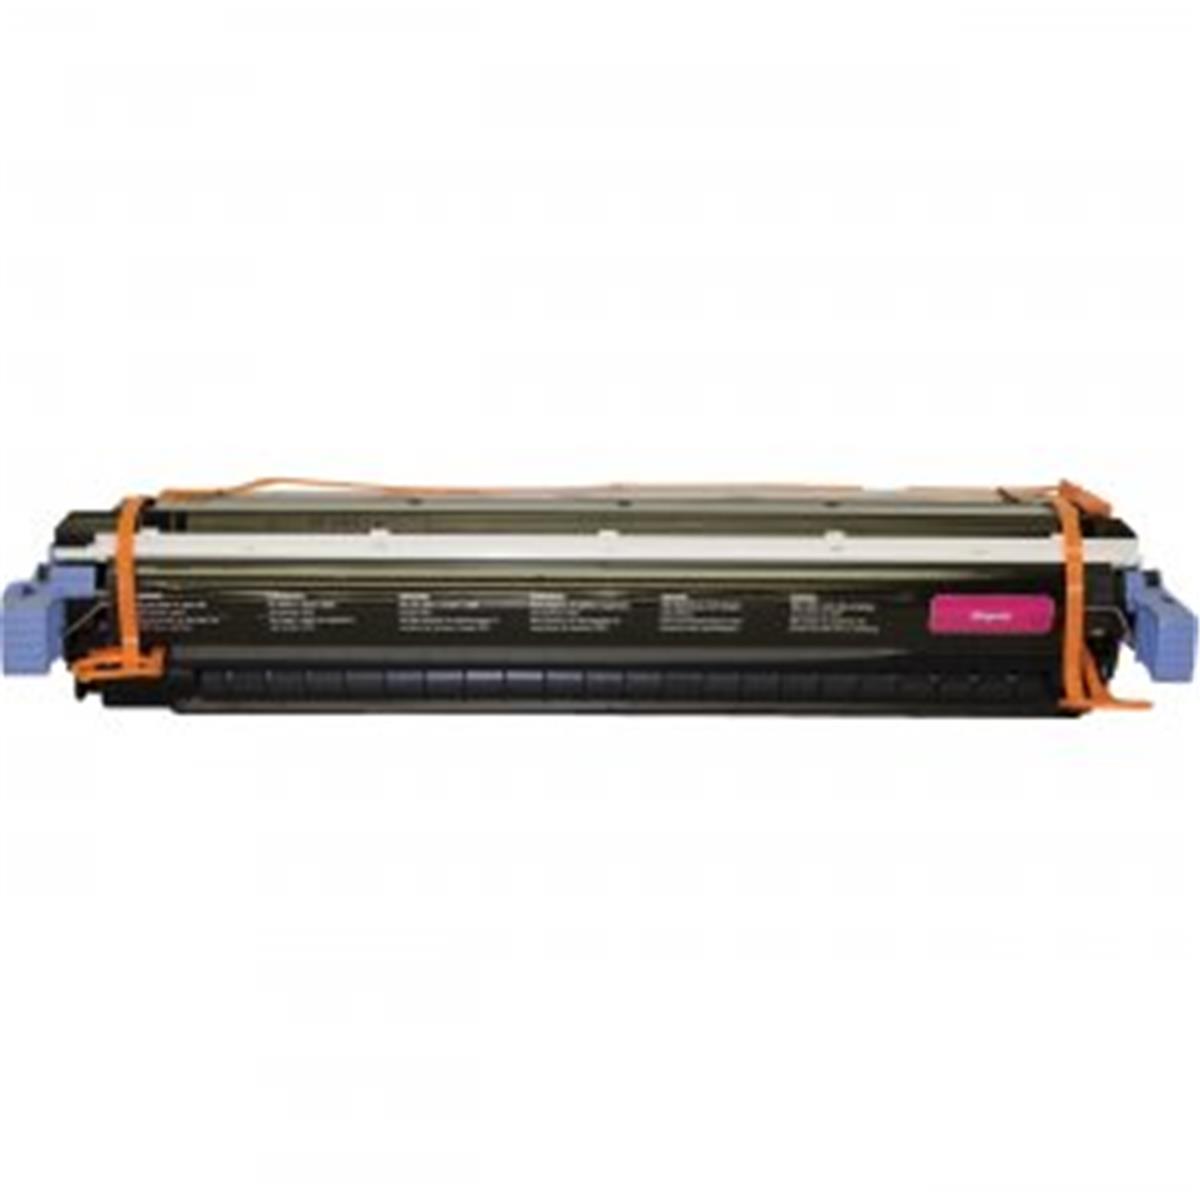 Picture of Abilityone AB16703779 Alternative 304A Standard Magenta Toner Cartridge for HP Color LaserJet CP2025